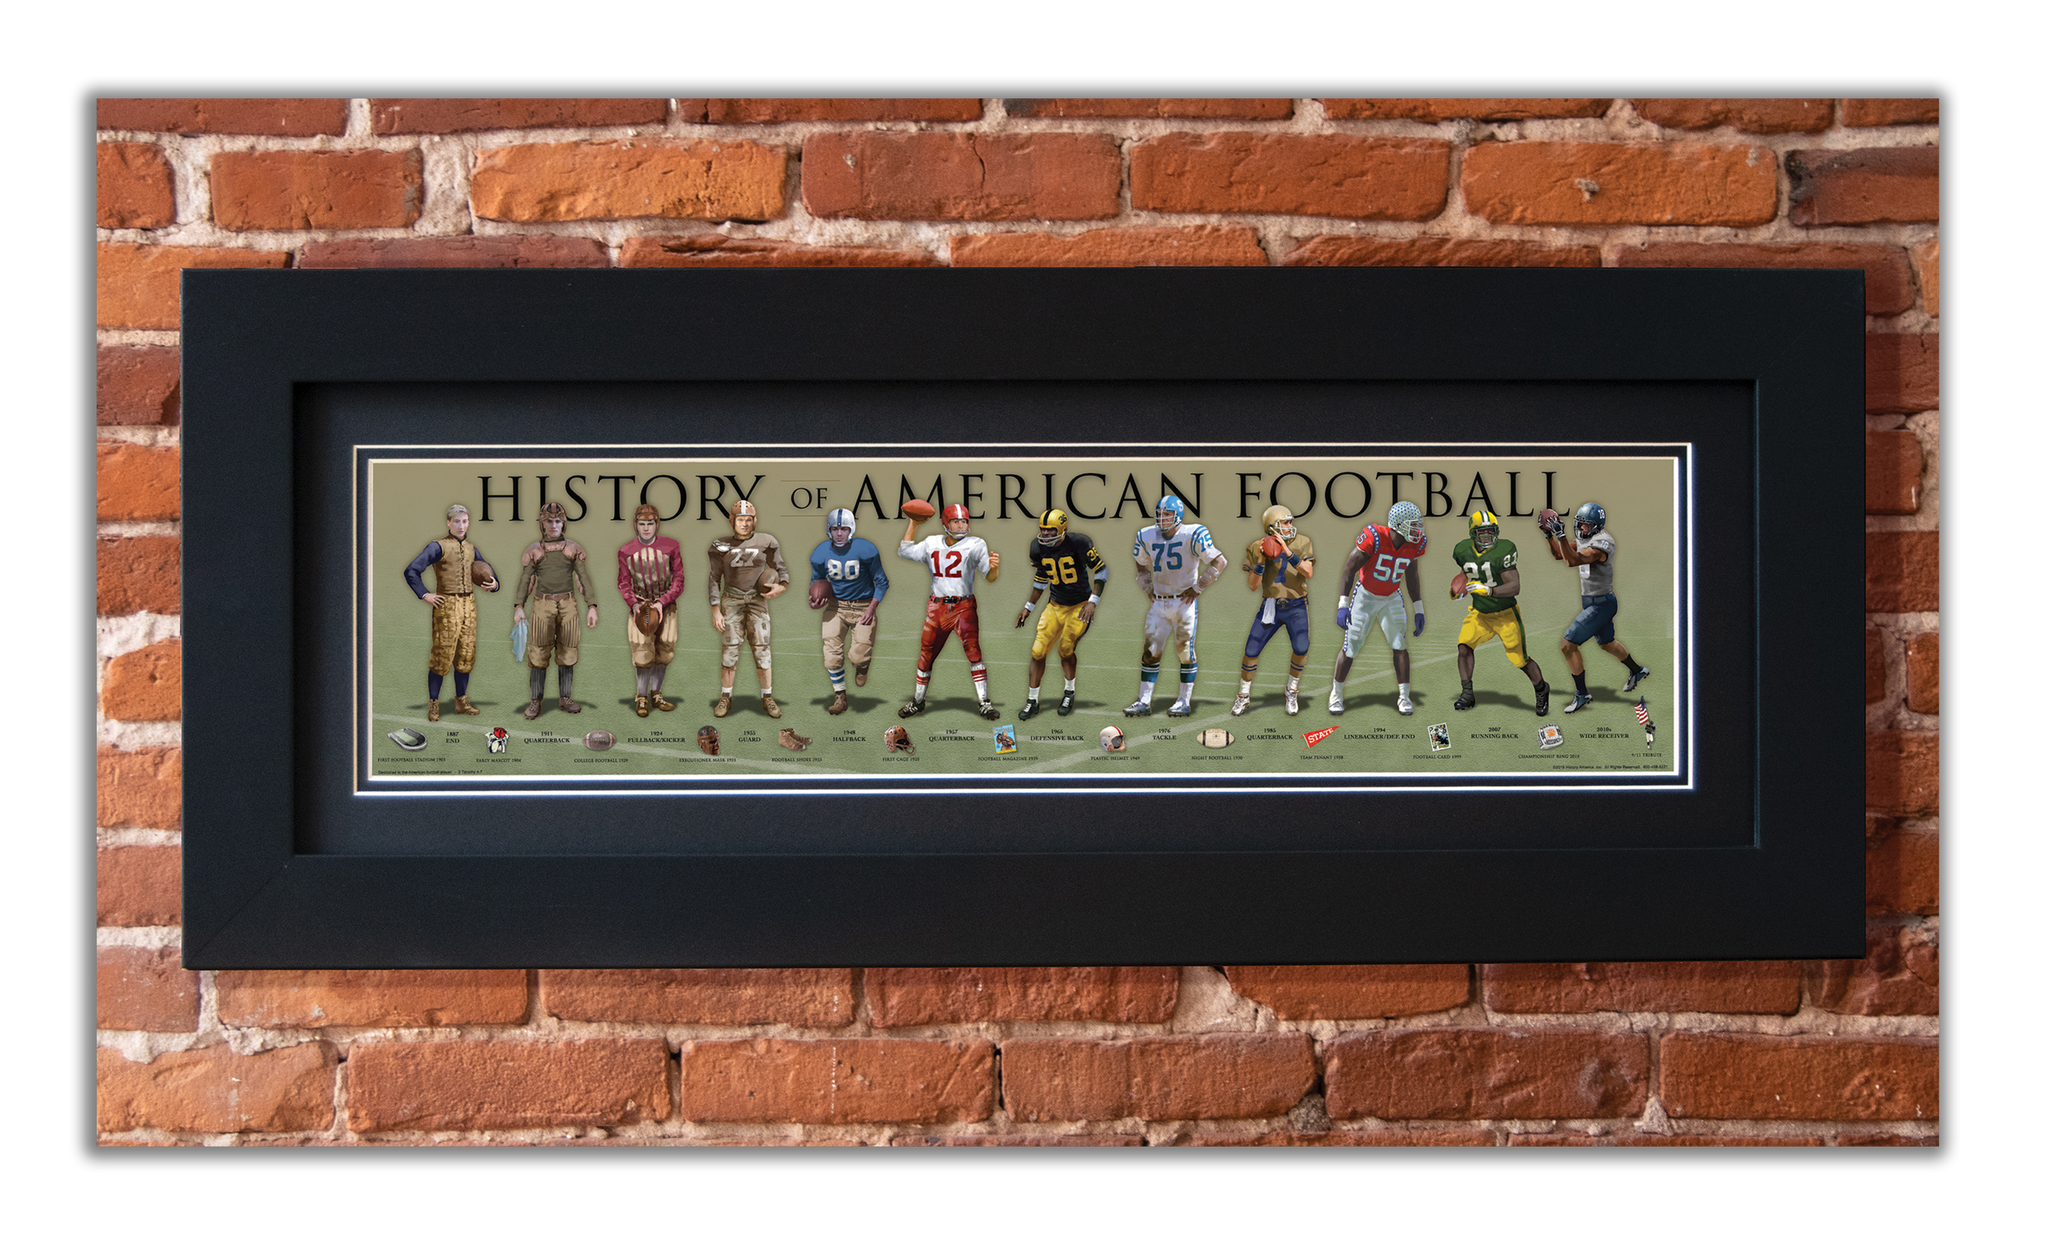 Football - Framed 2” Black Double Matted, Flat Molding 6" x 24”